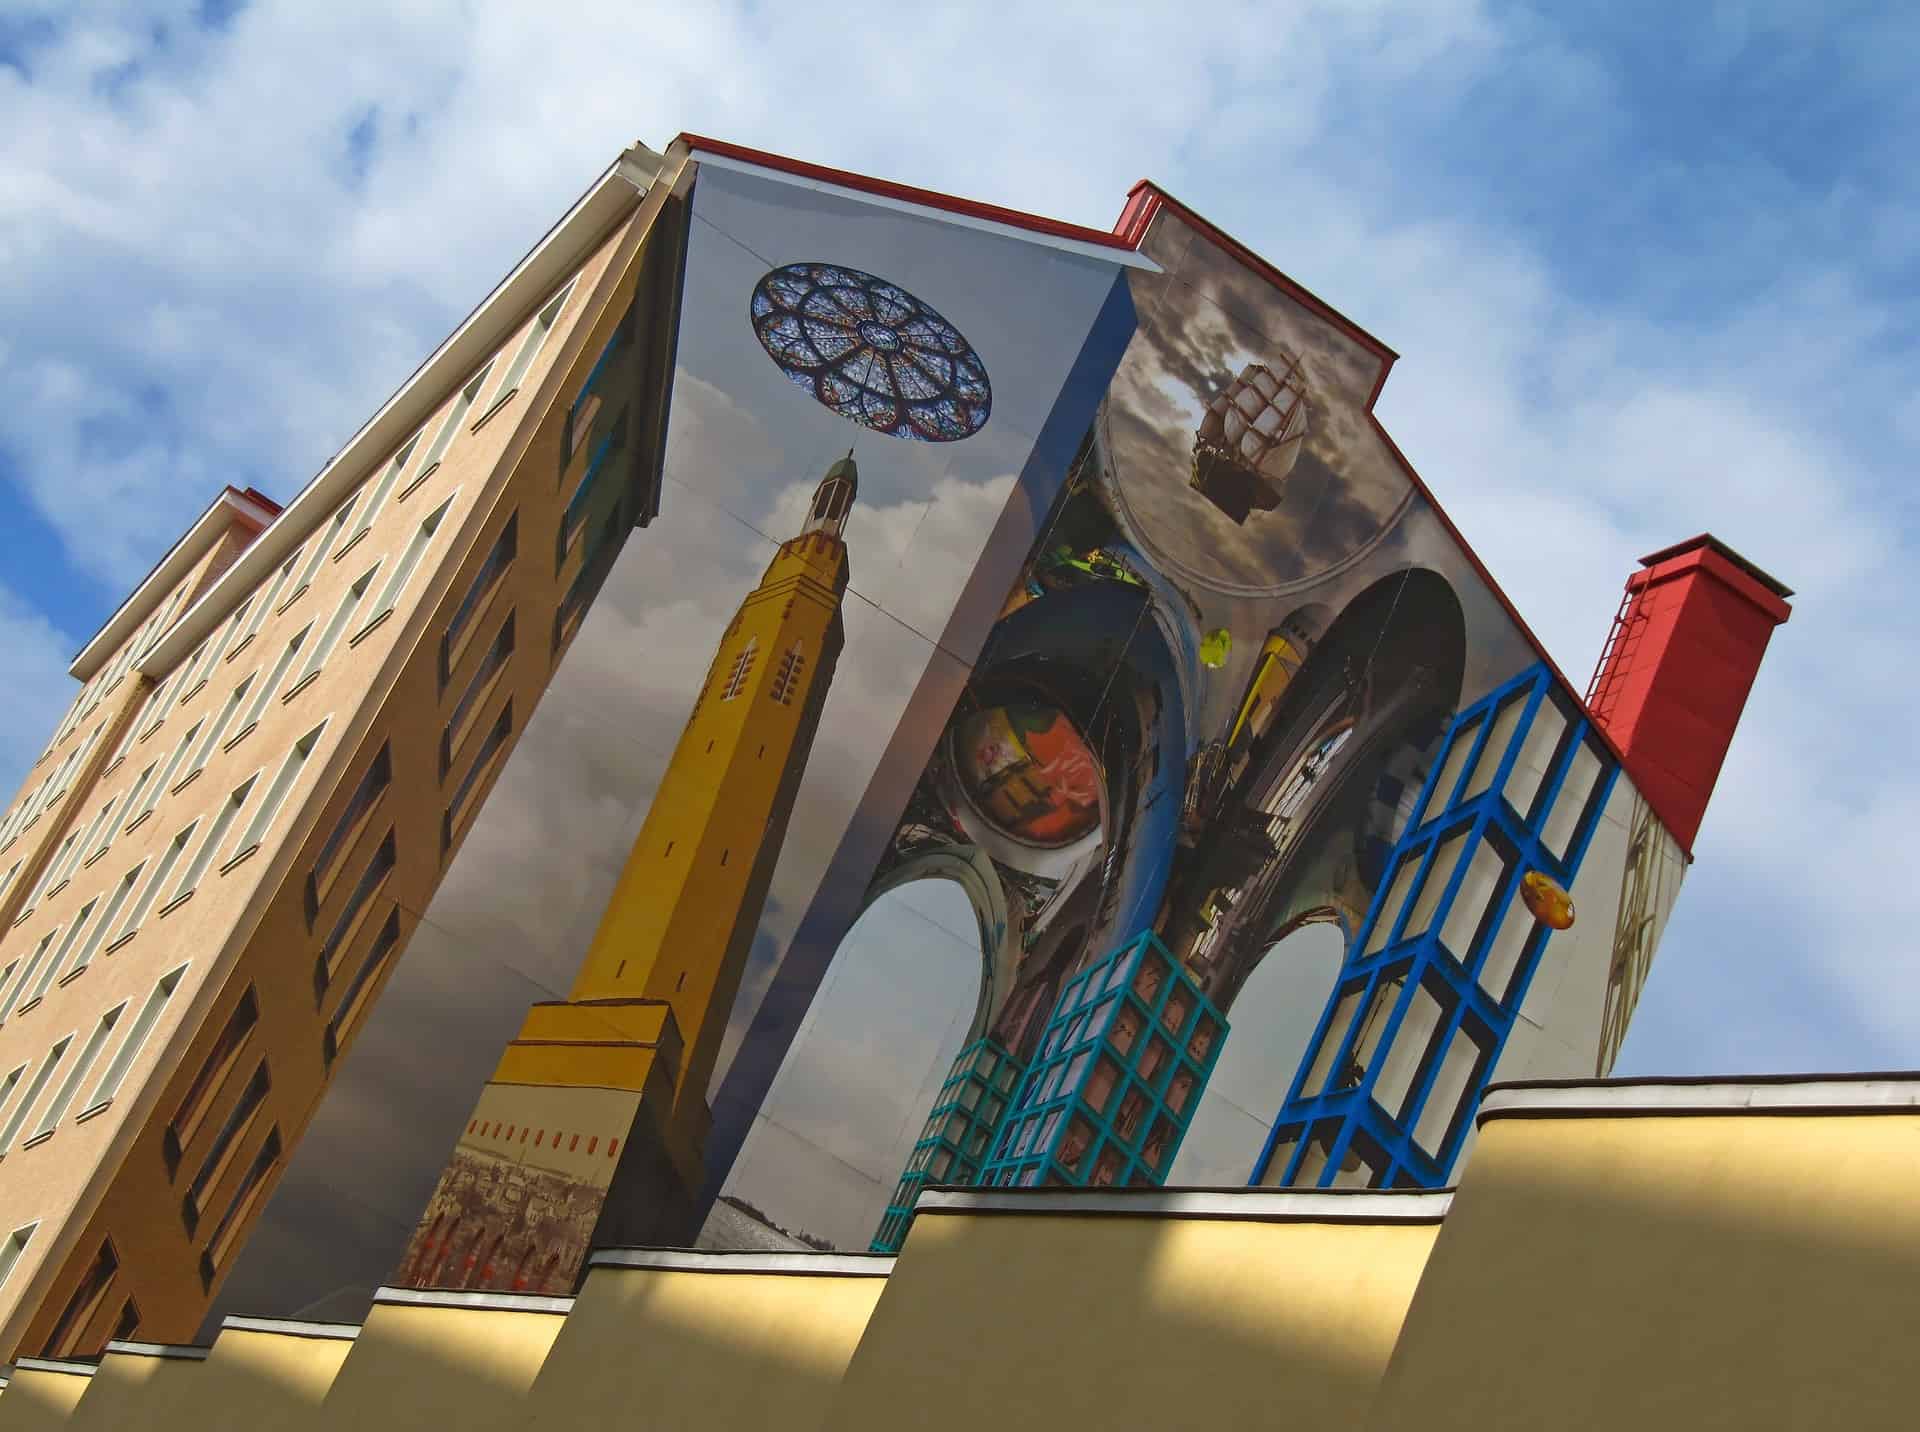 canted angle of mural art on building